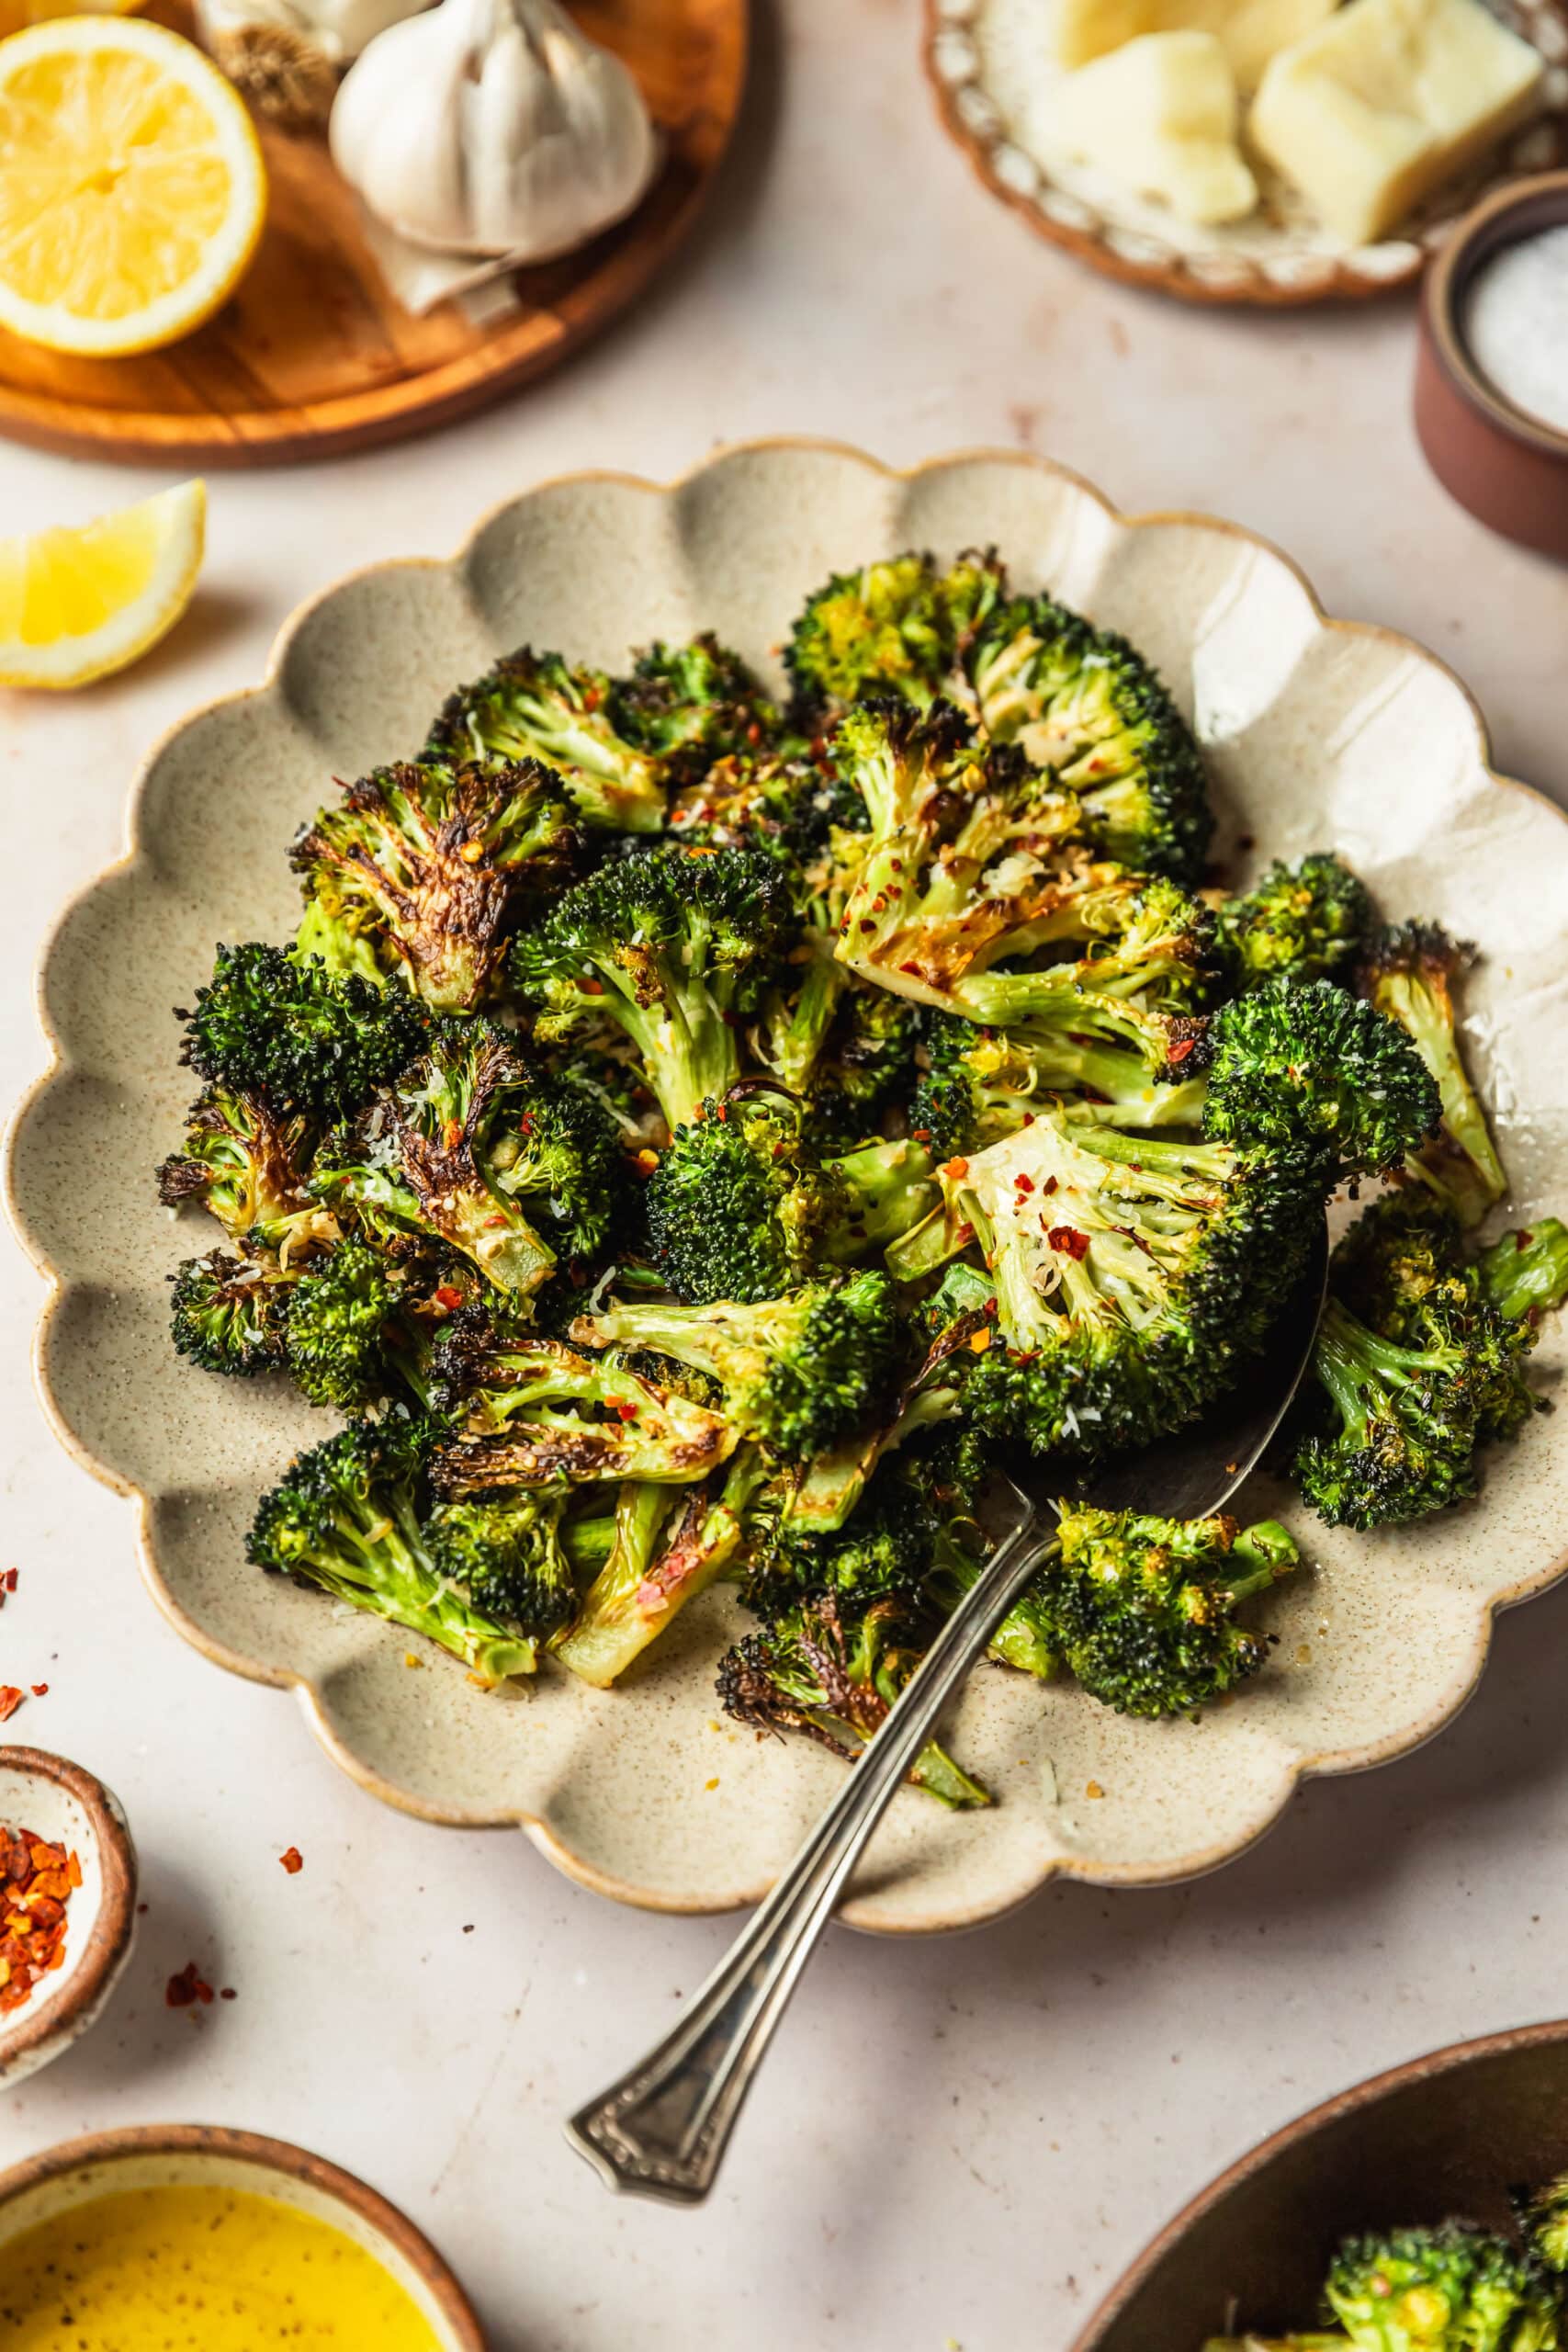 Lemony charred broccoli with parmesan on a tan plate next to brown bowls of red pepper flakes, oil, salt, parmesan, and garlic with a tan background.